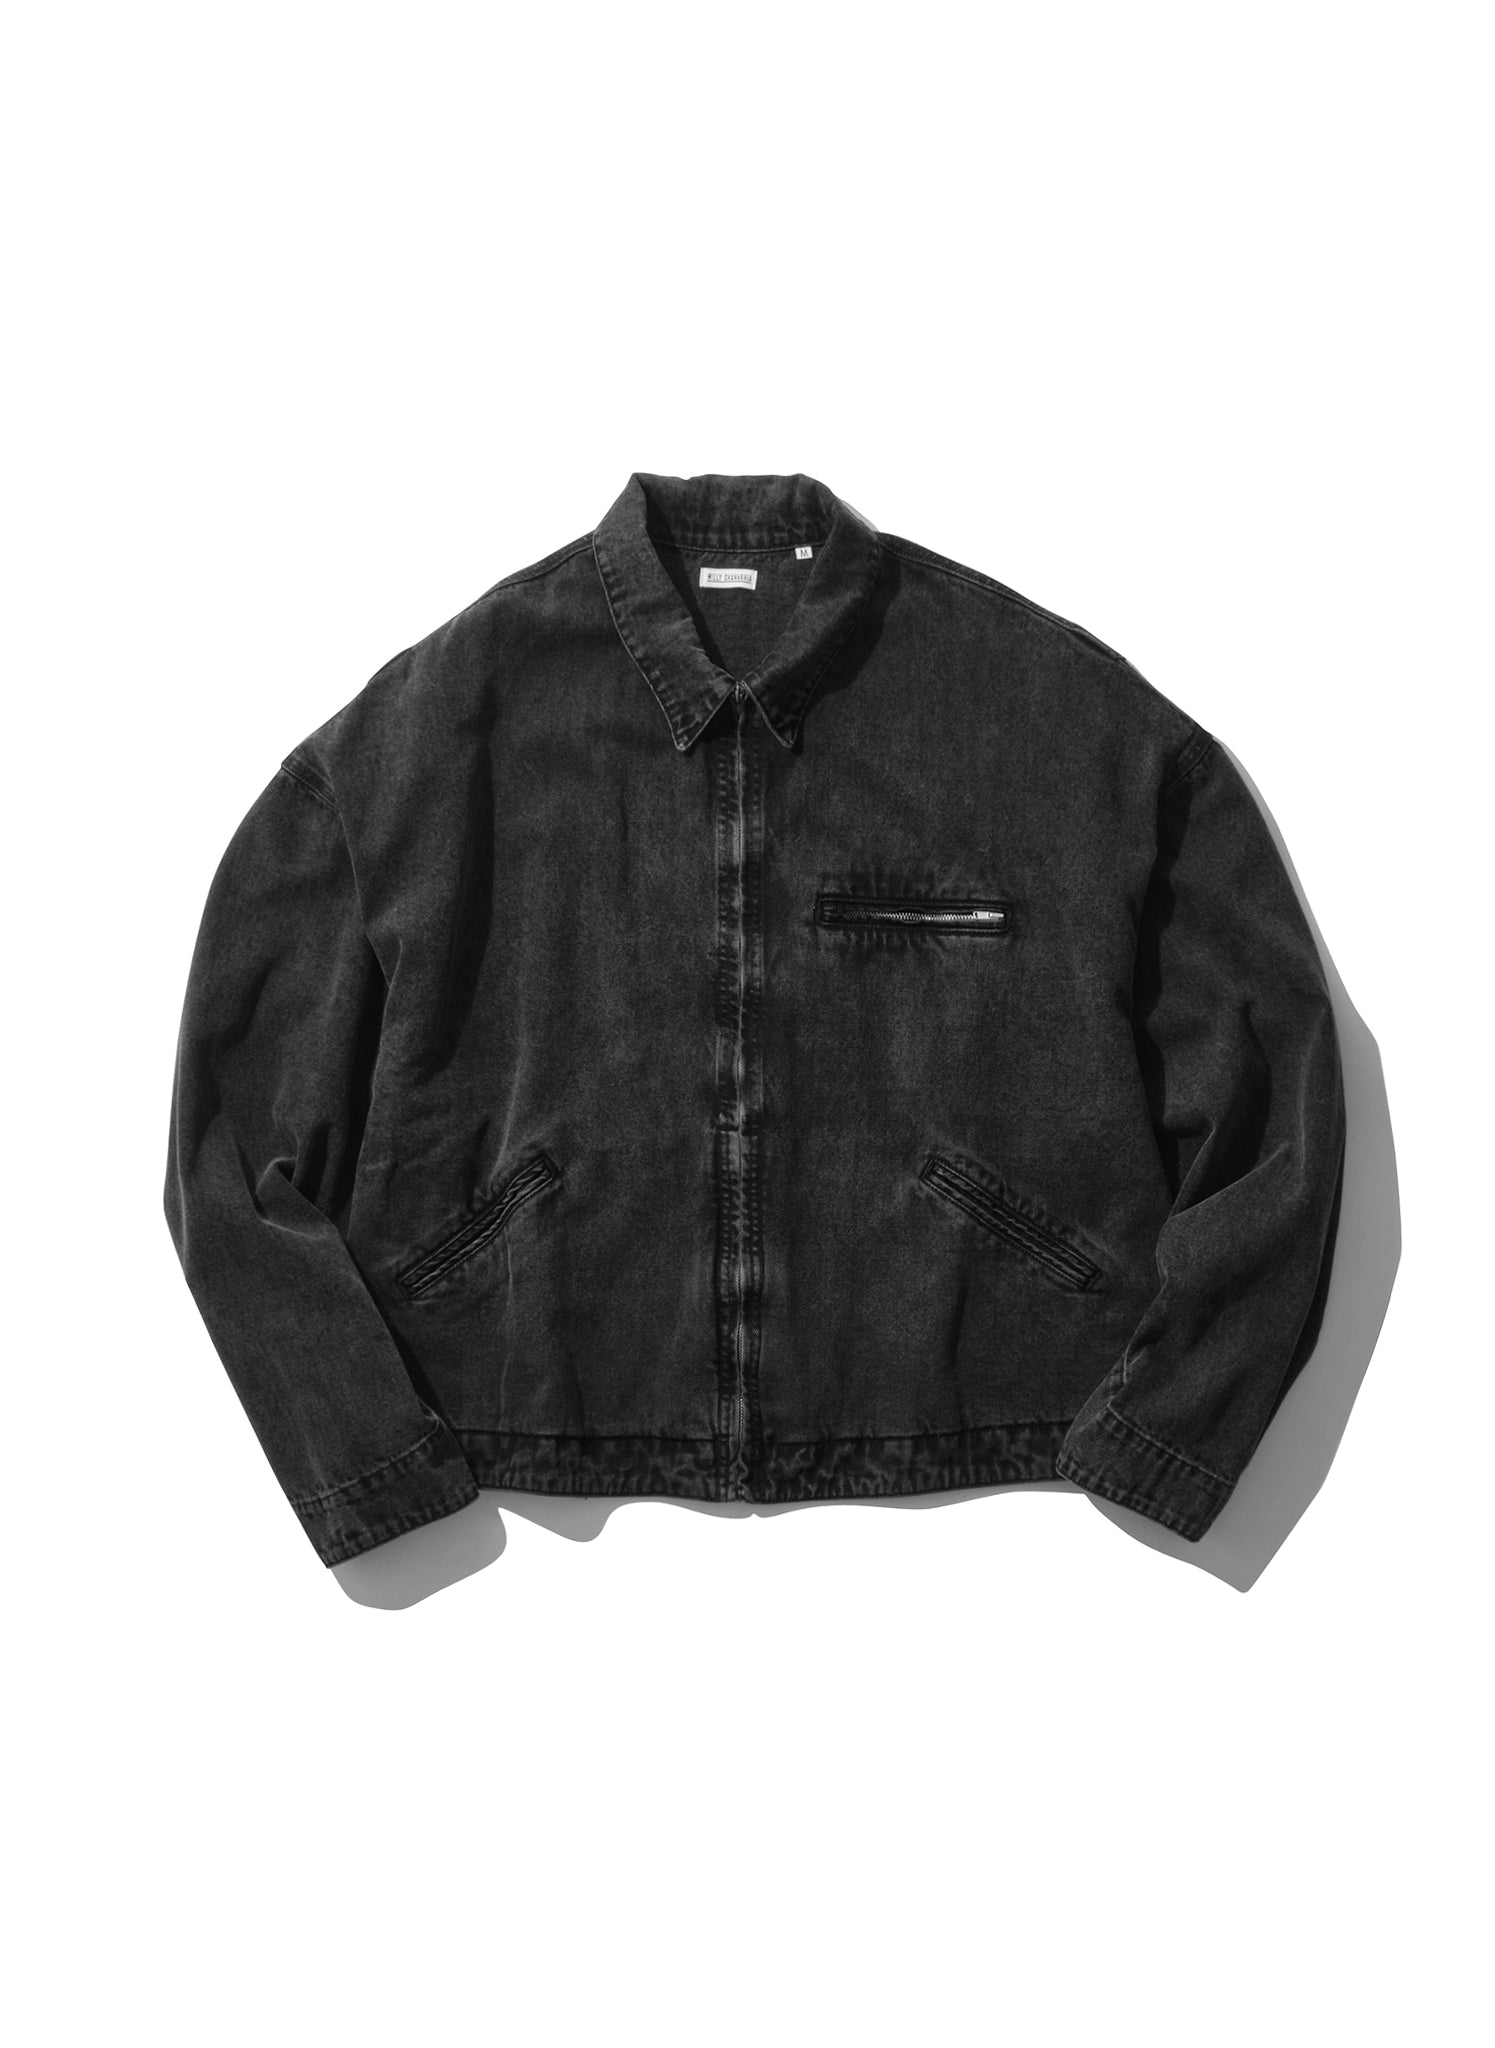 Last One WILLY CHAVARRIA / DOWNTOWN JACKET WASHED BLACK